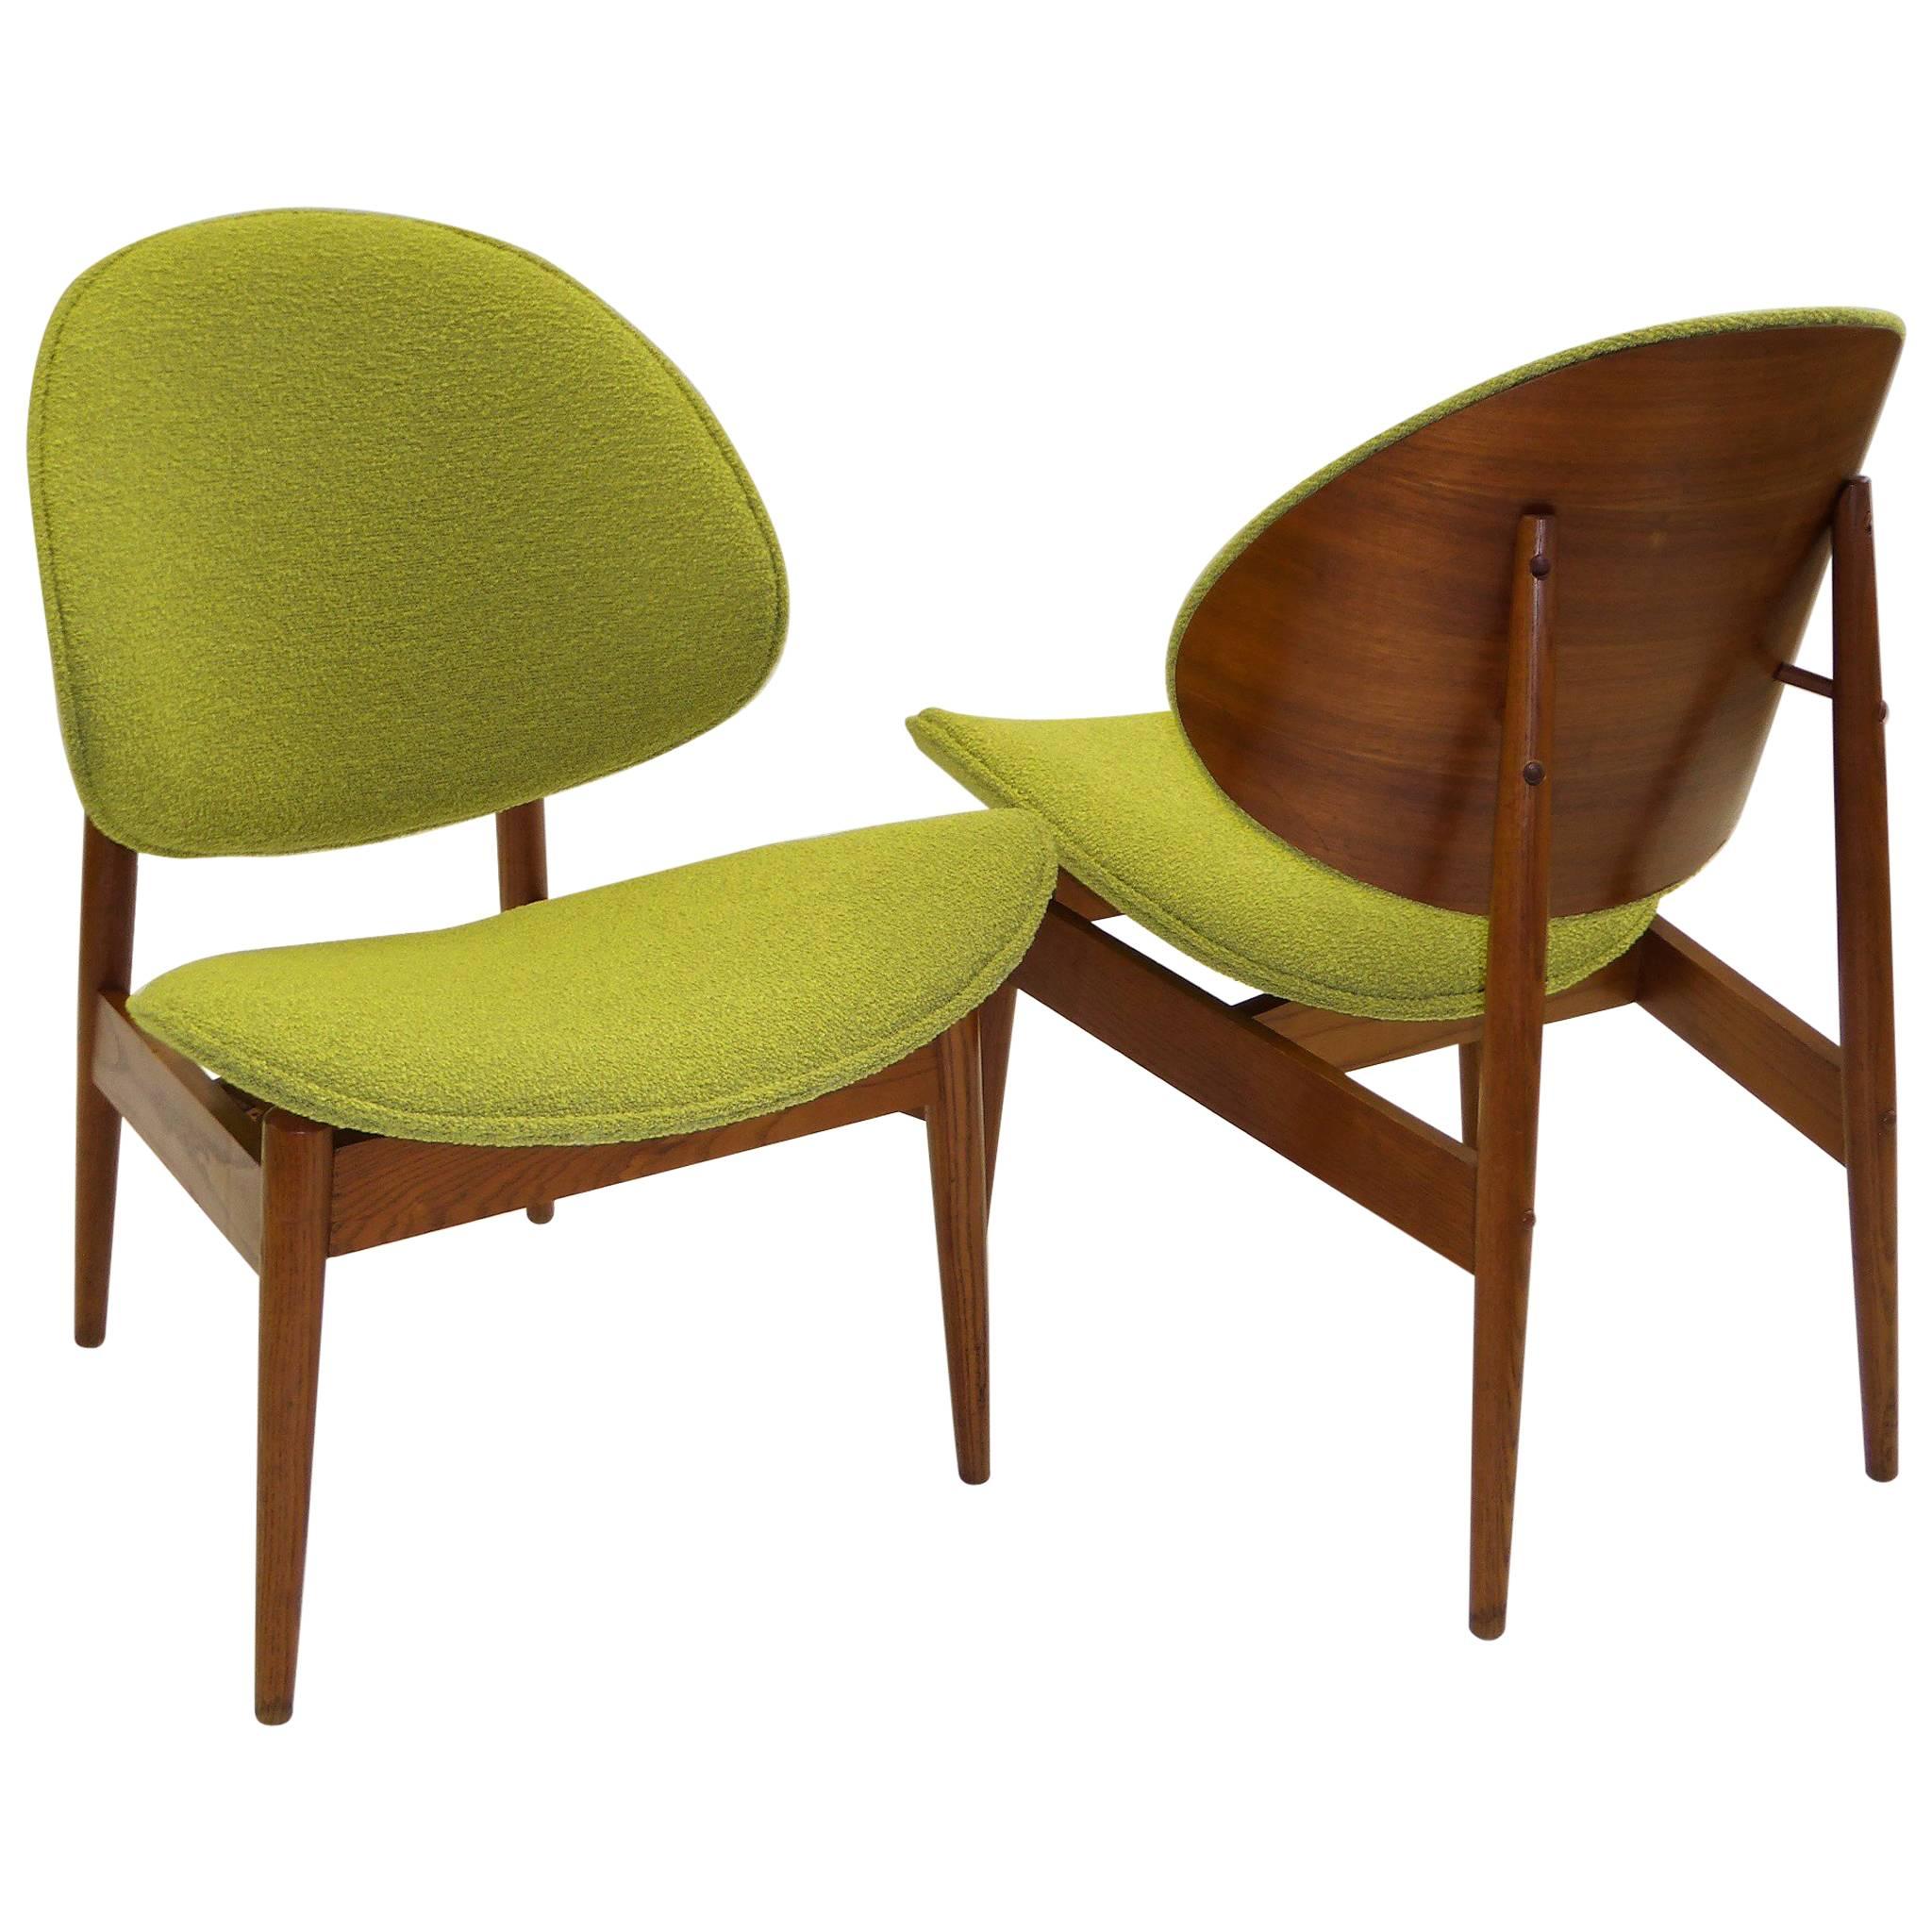 1950s Clam Shell Chairs by Seymour James Weiner for Kodawood